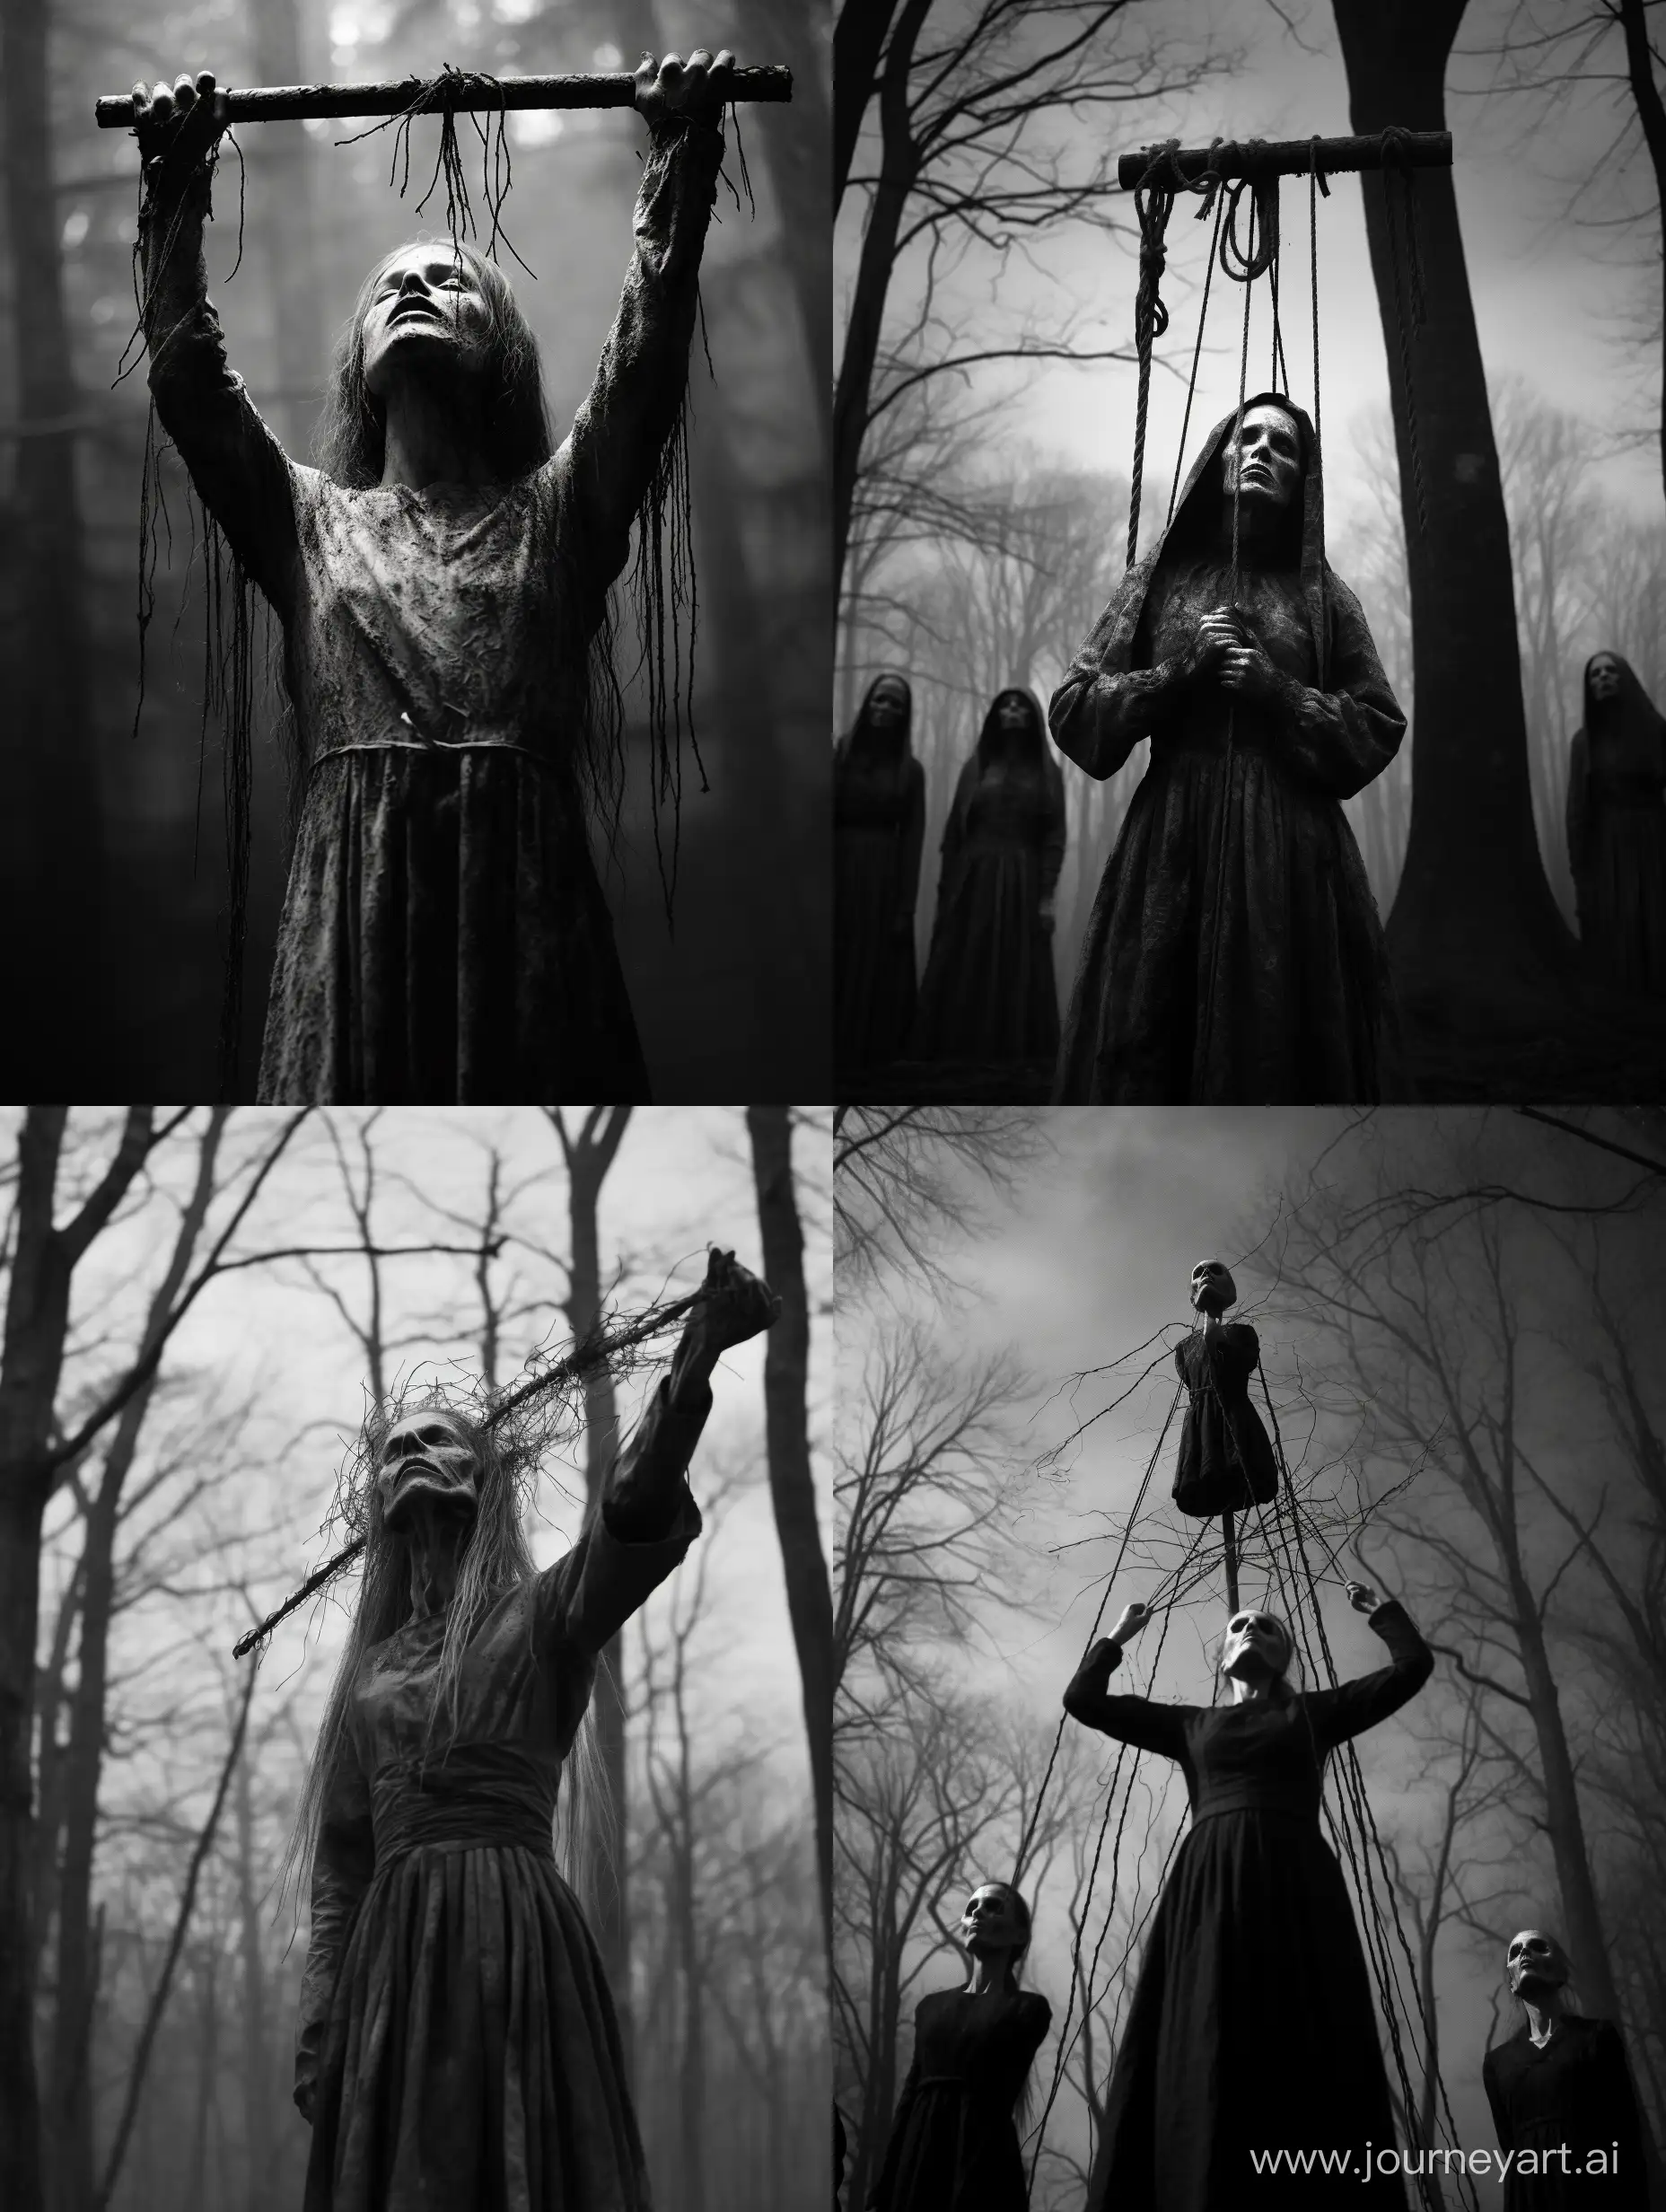 Unhinged-Pagan-Horror-in-Salem-Witch-Trials-Gripping-Grayscale-Photo